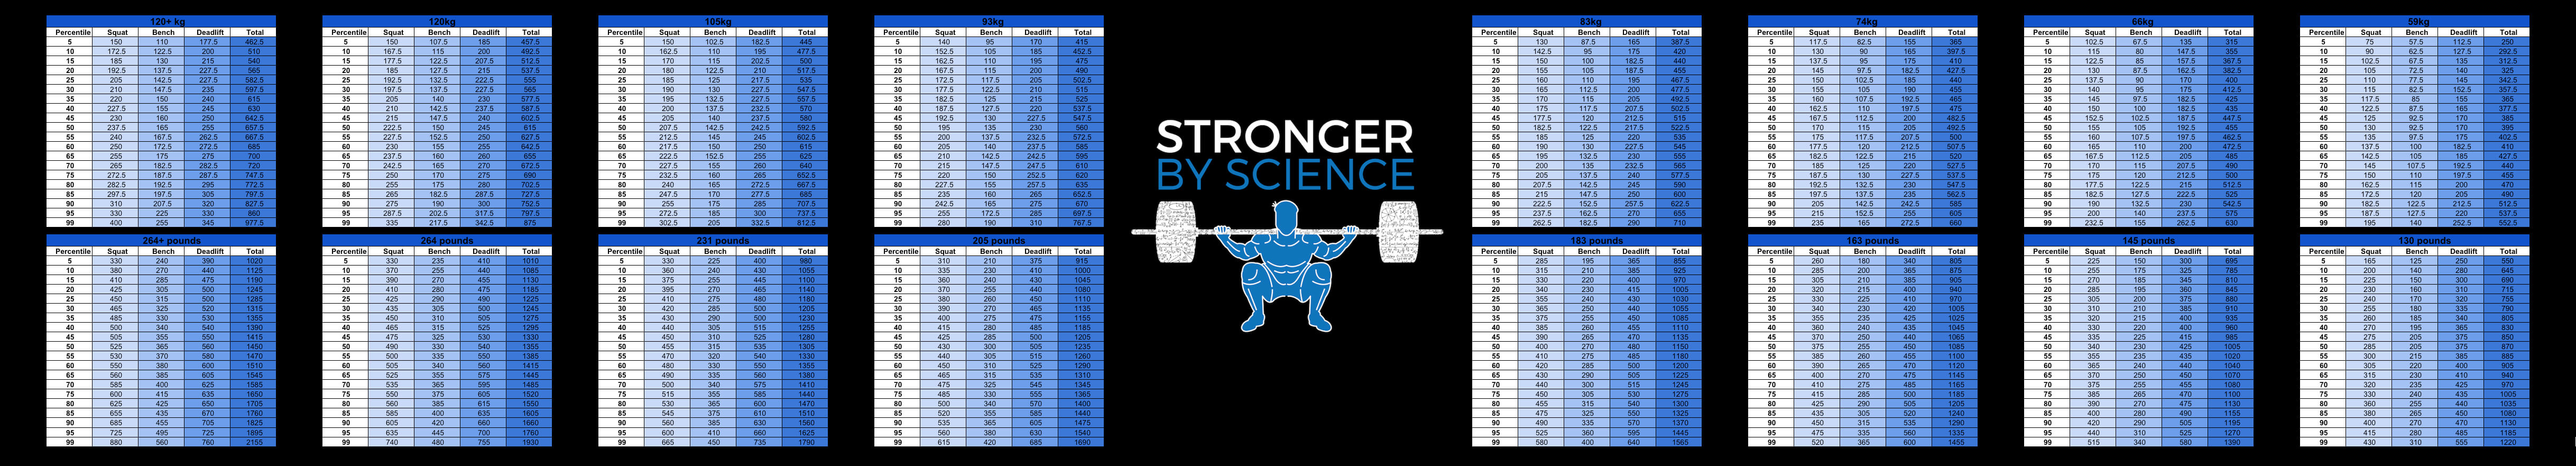 what is strong – men's strength percentiles